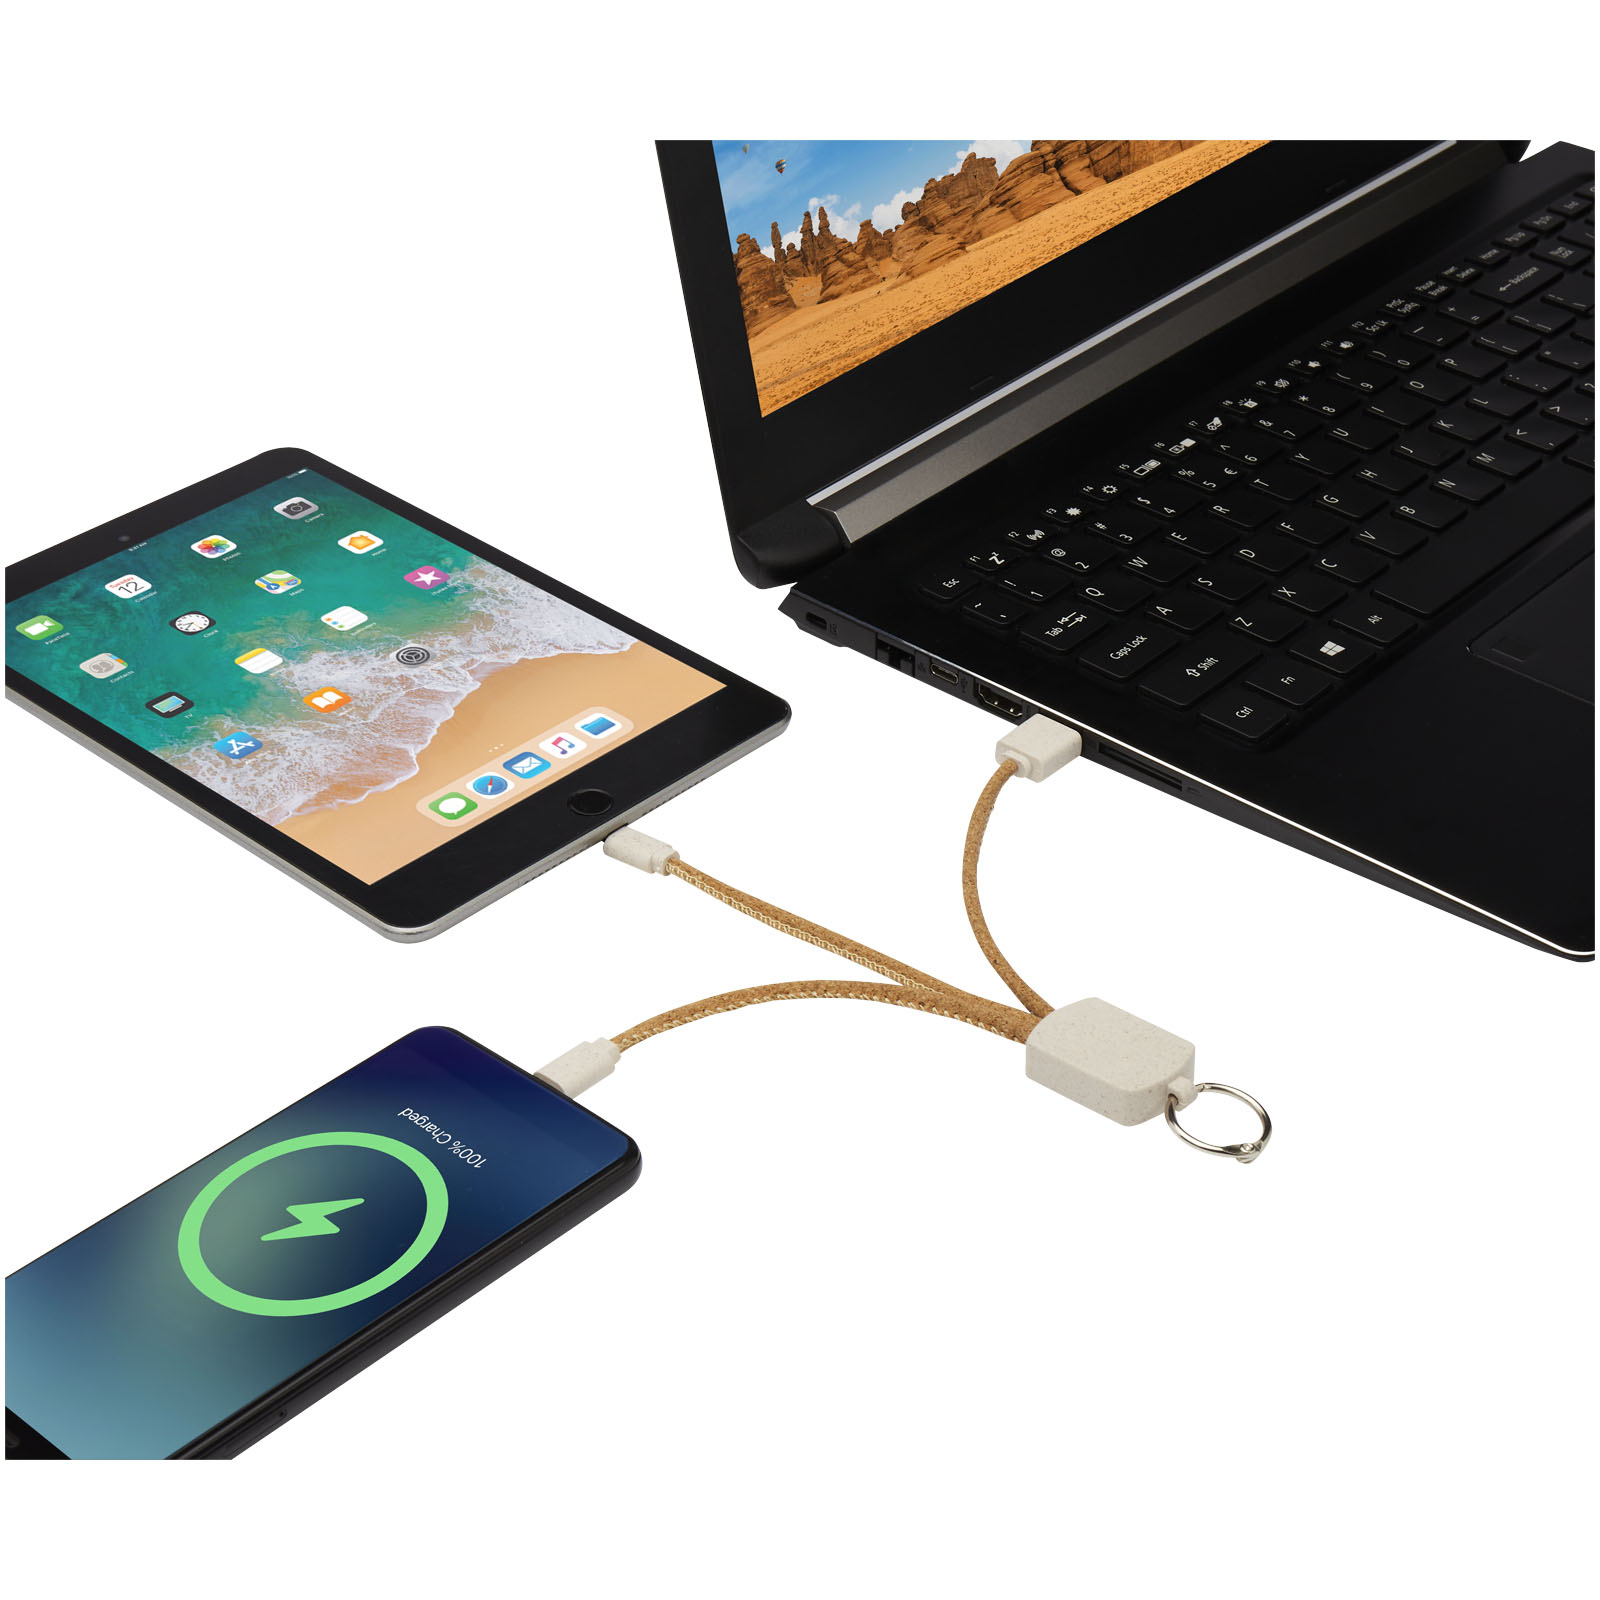 Advertising Cables - Bates wheat straw and cork 3-in-1 charging cable - 5